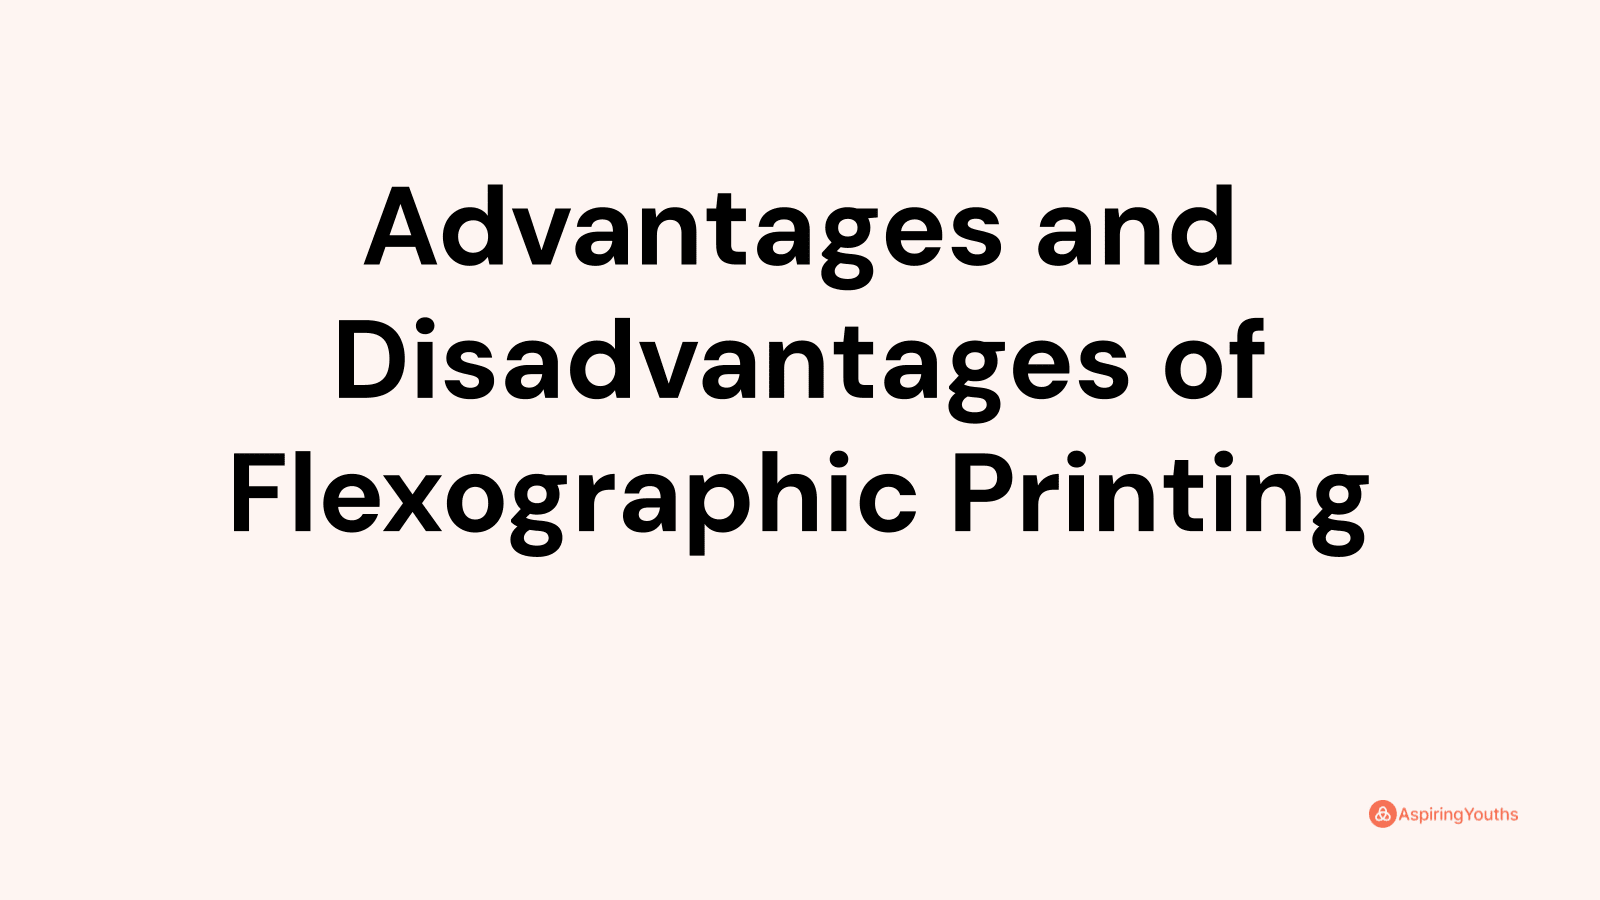 Advantages and disadvantages of Flexographic Printing